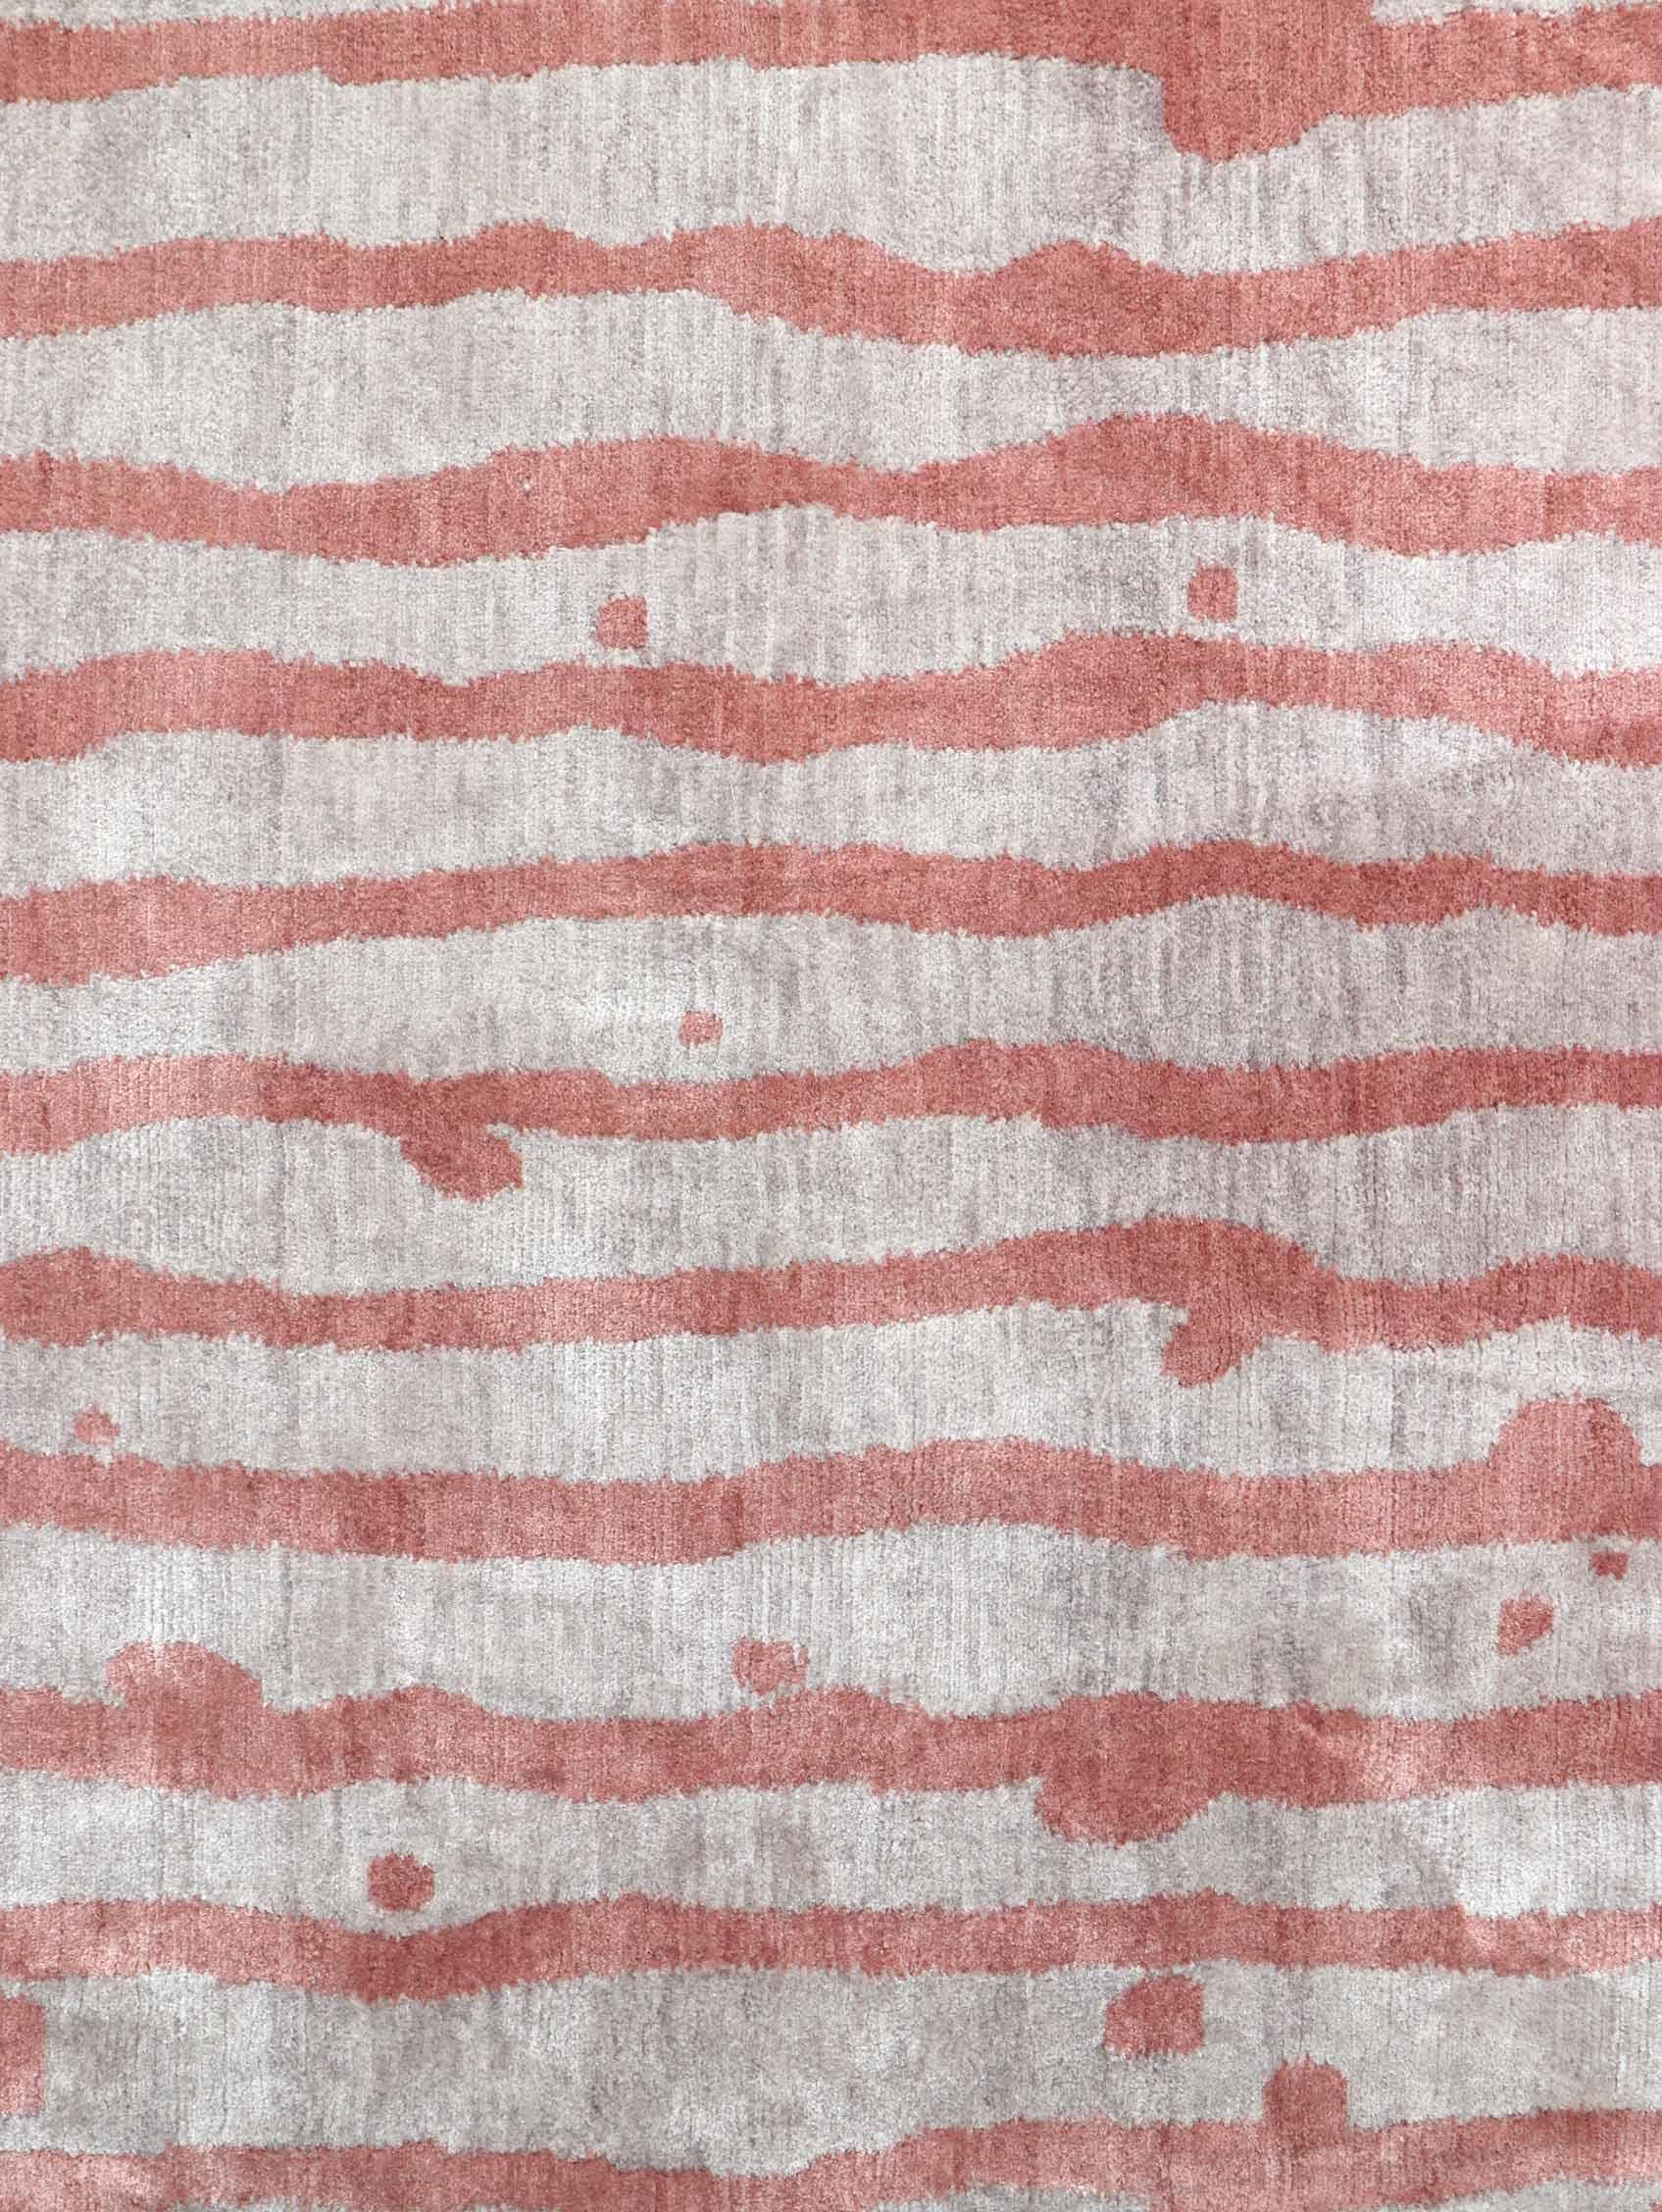 American Drippy Stripe Sienna Hand Knotted Rug by Eskayel For Sale